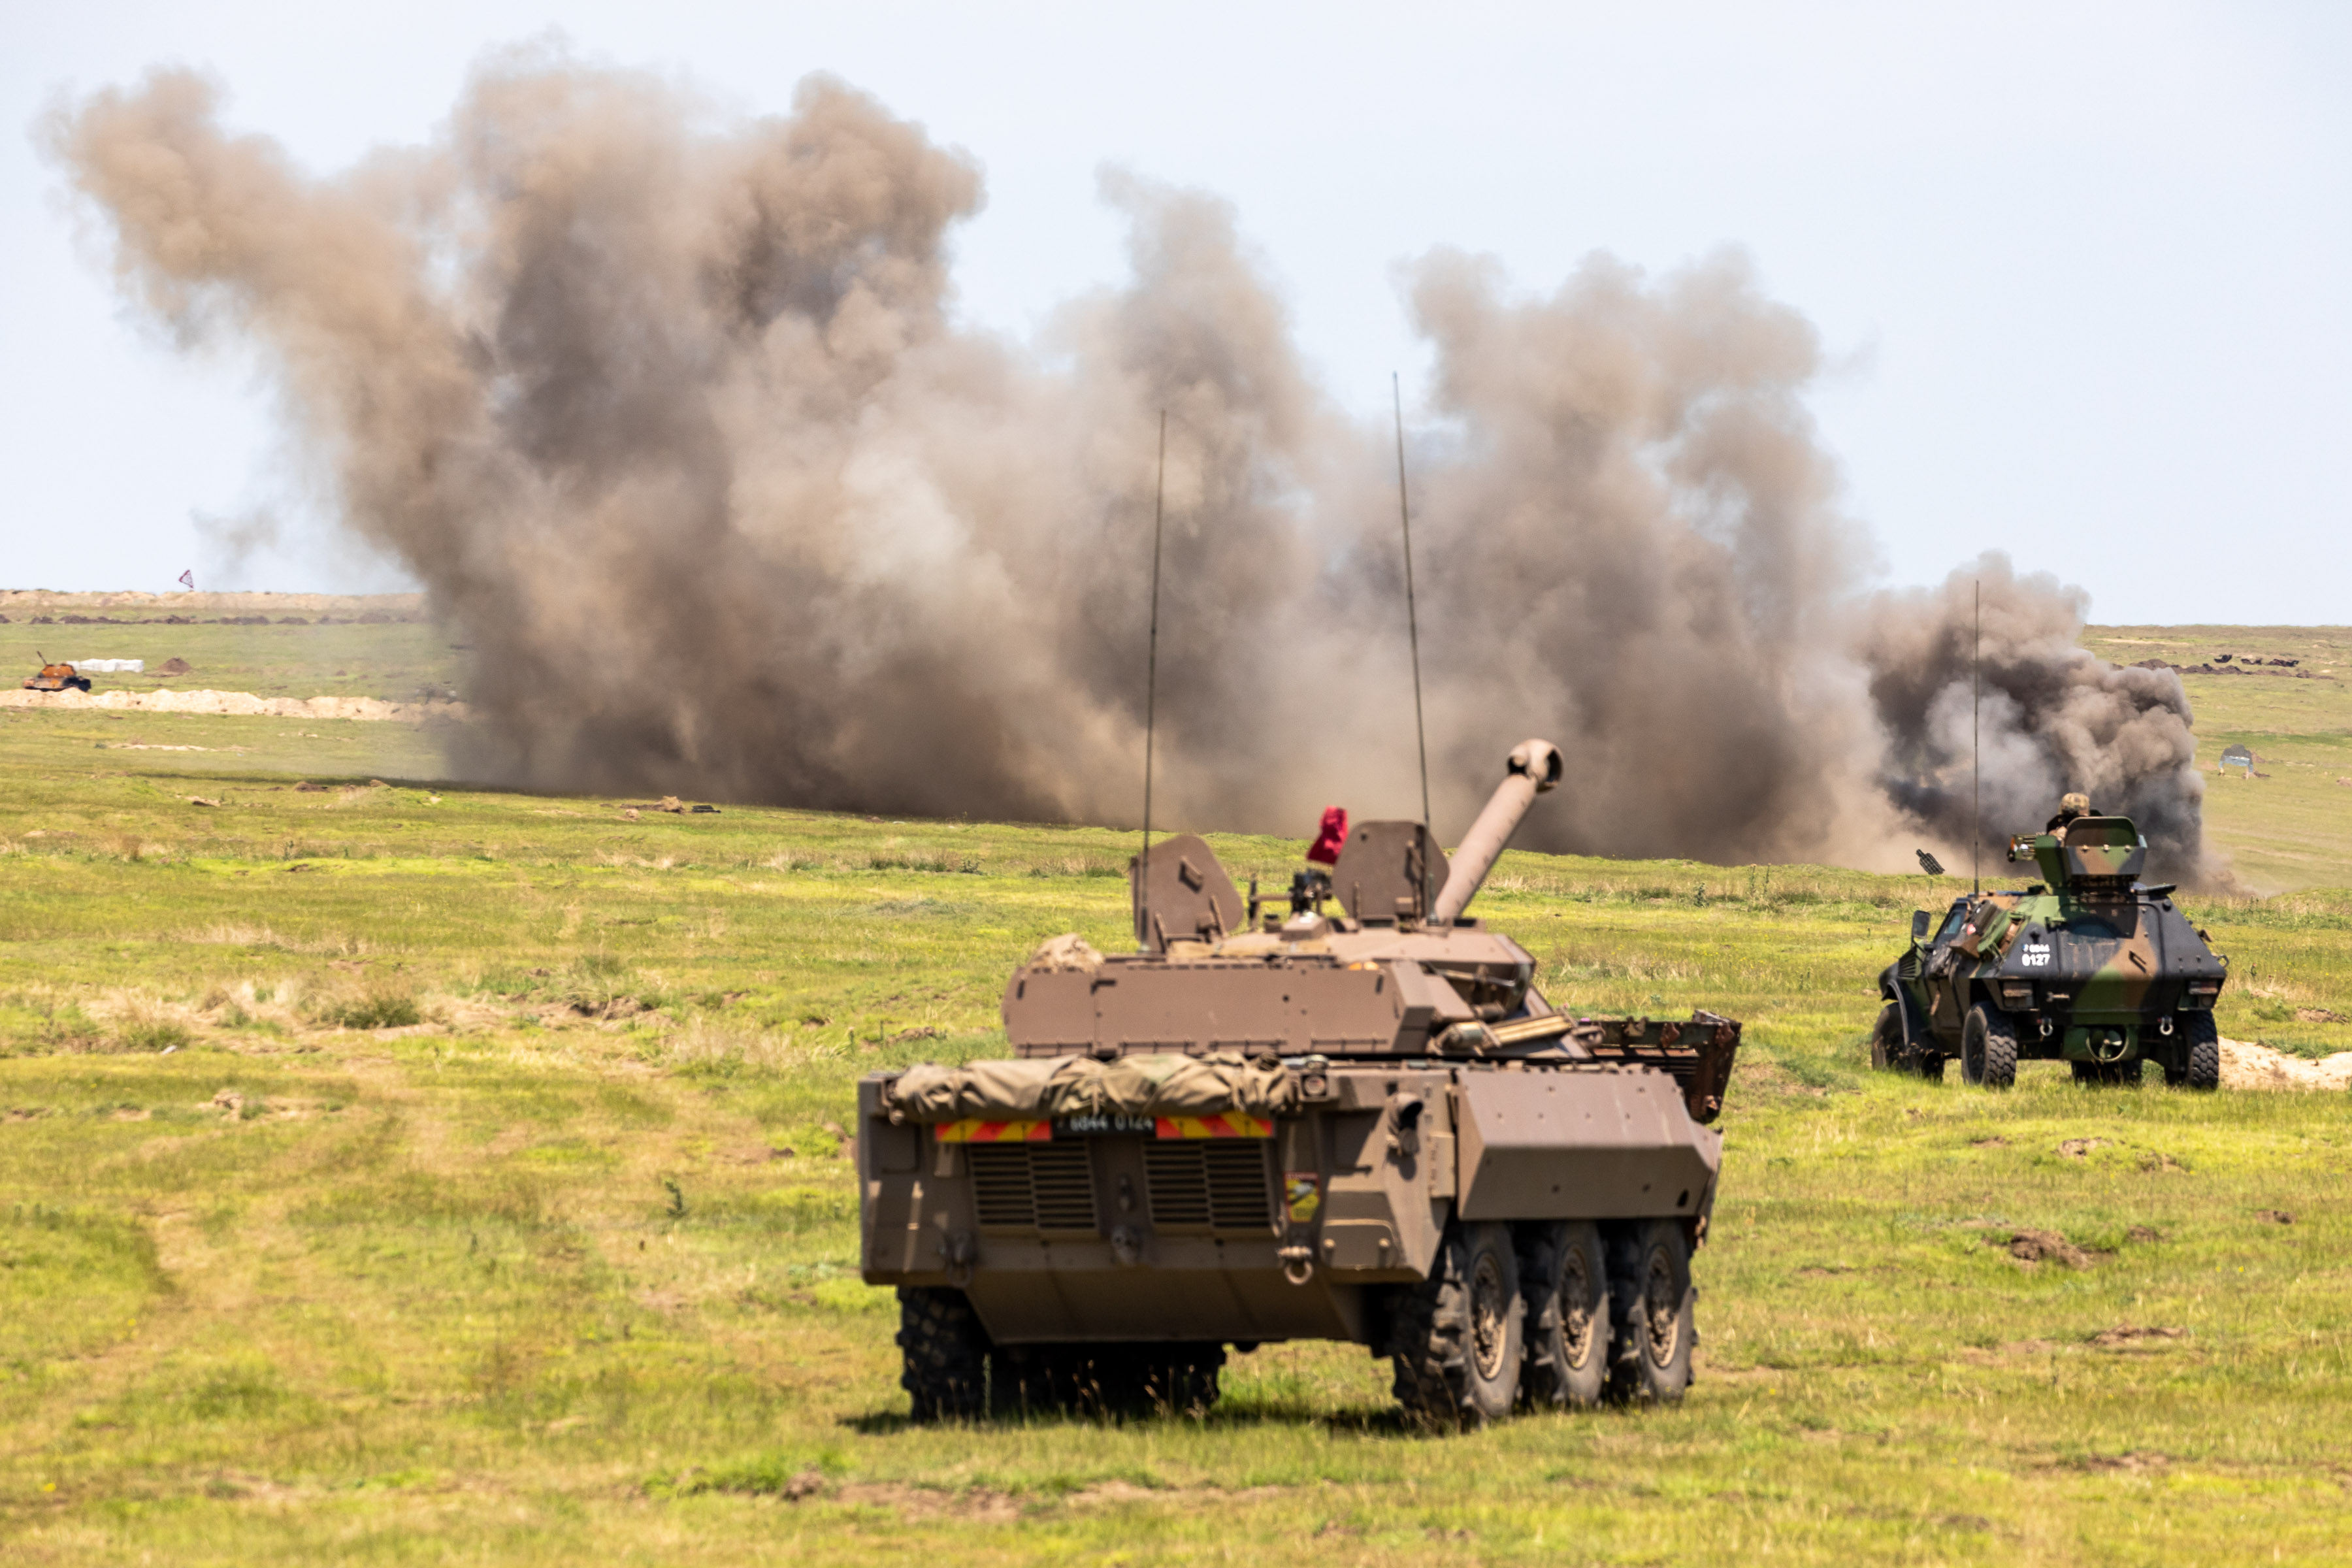 Image shows RAF armoured vehicles firing missiles with dust blowing in the wind. 